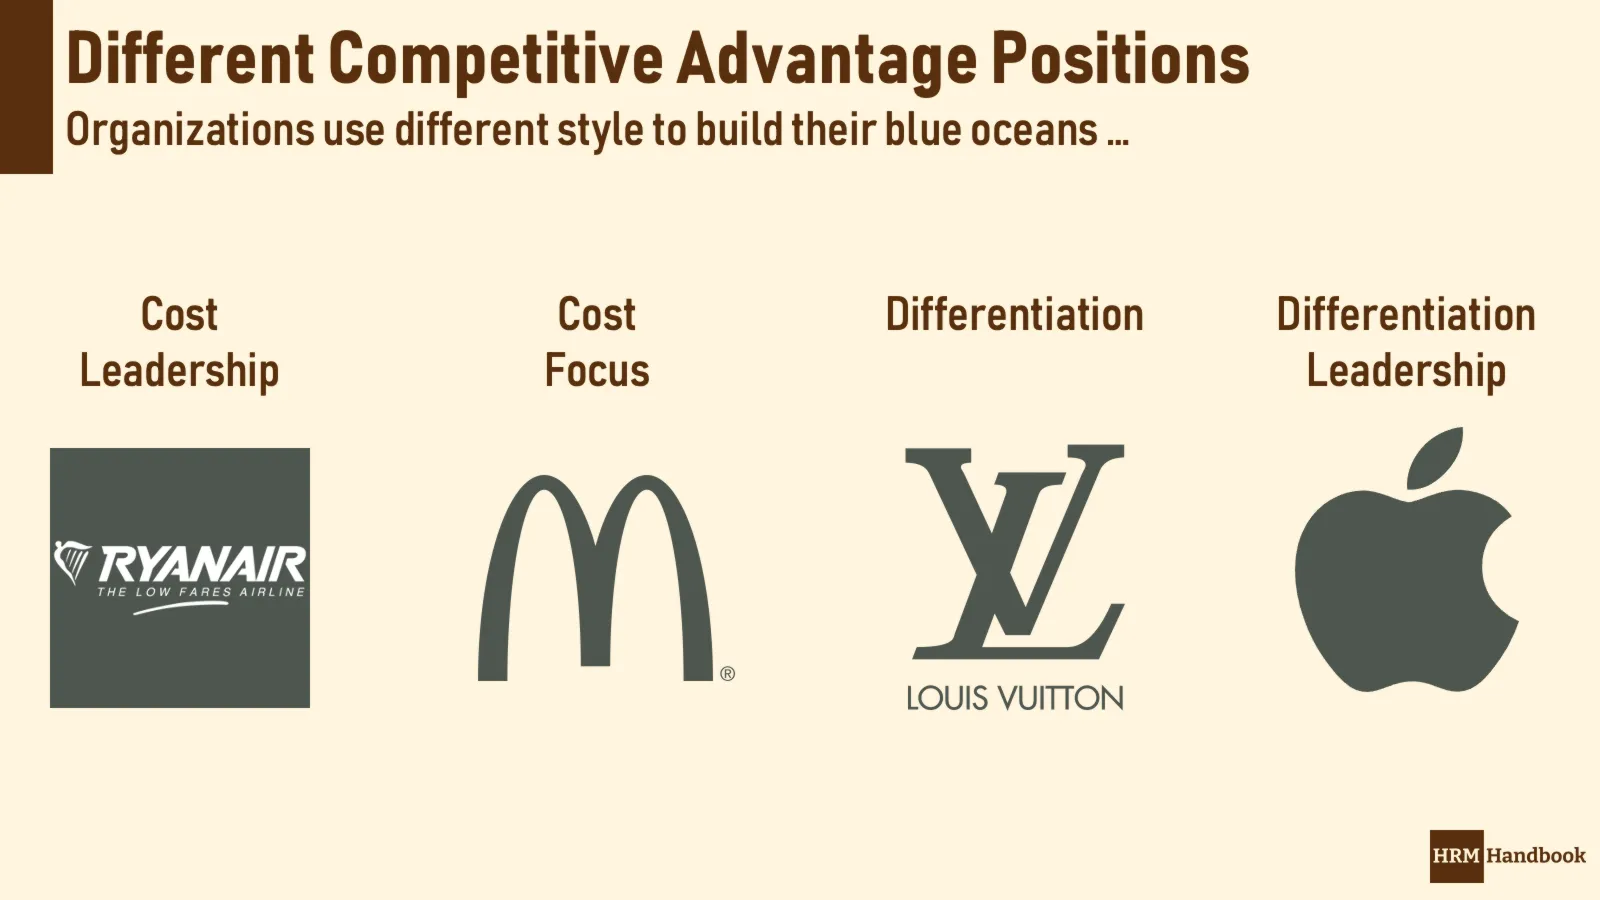 Different Approaches to Build a Sustainable Competitive Advantage from Cost Leadership to Differentiation Leadership